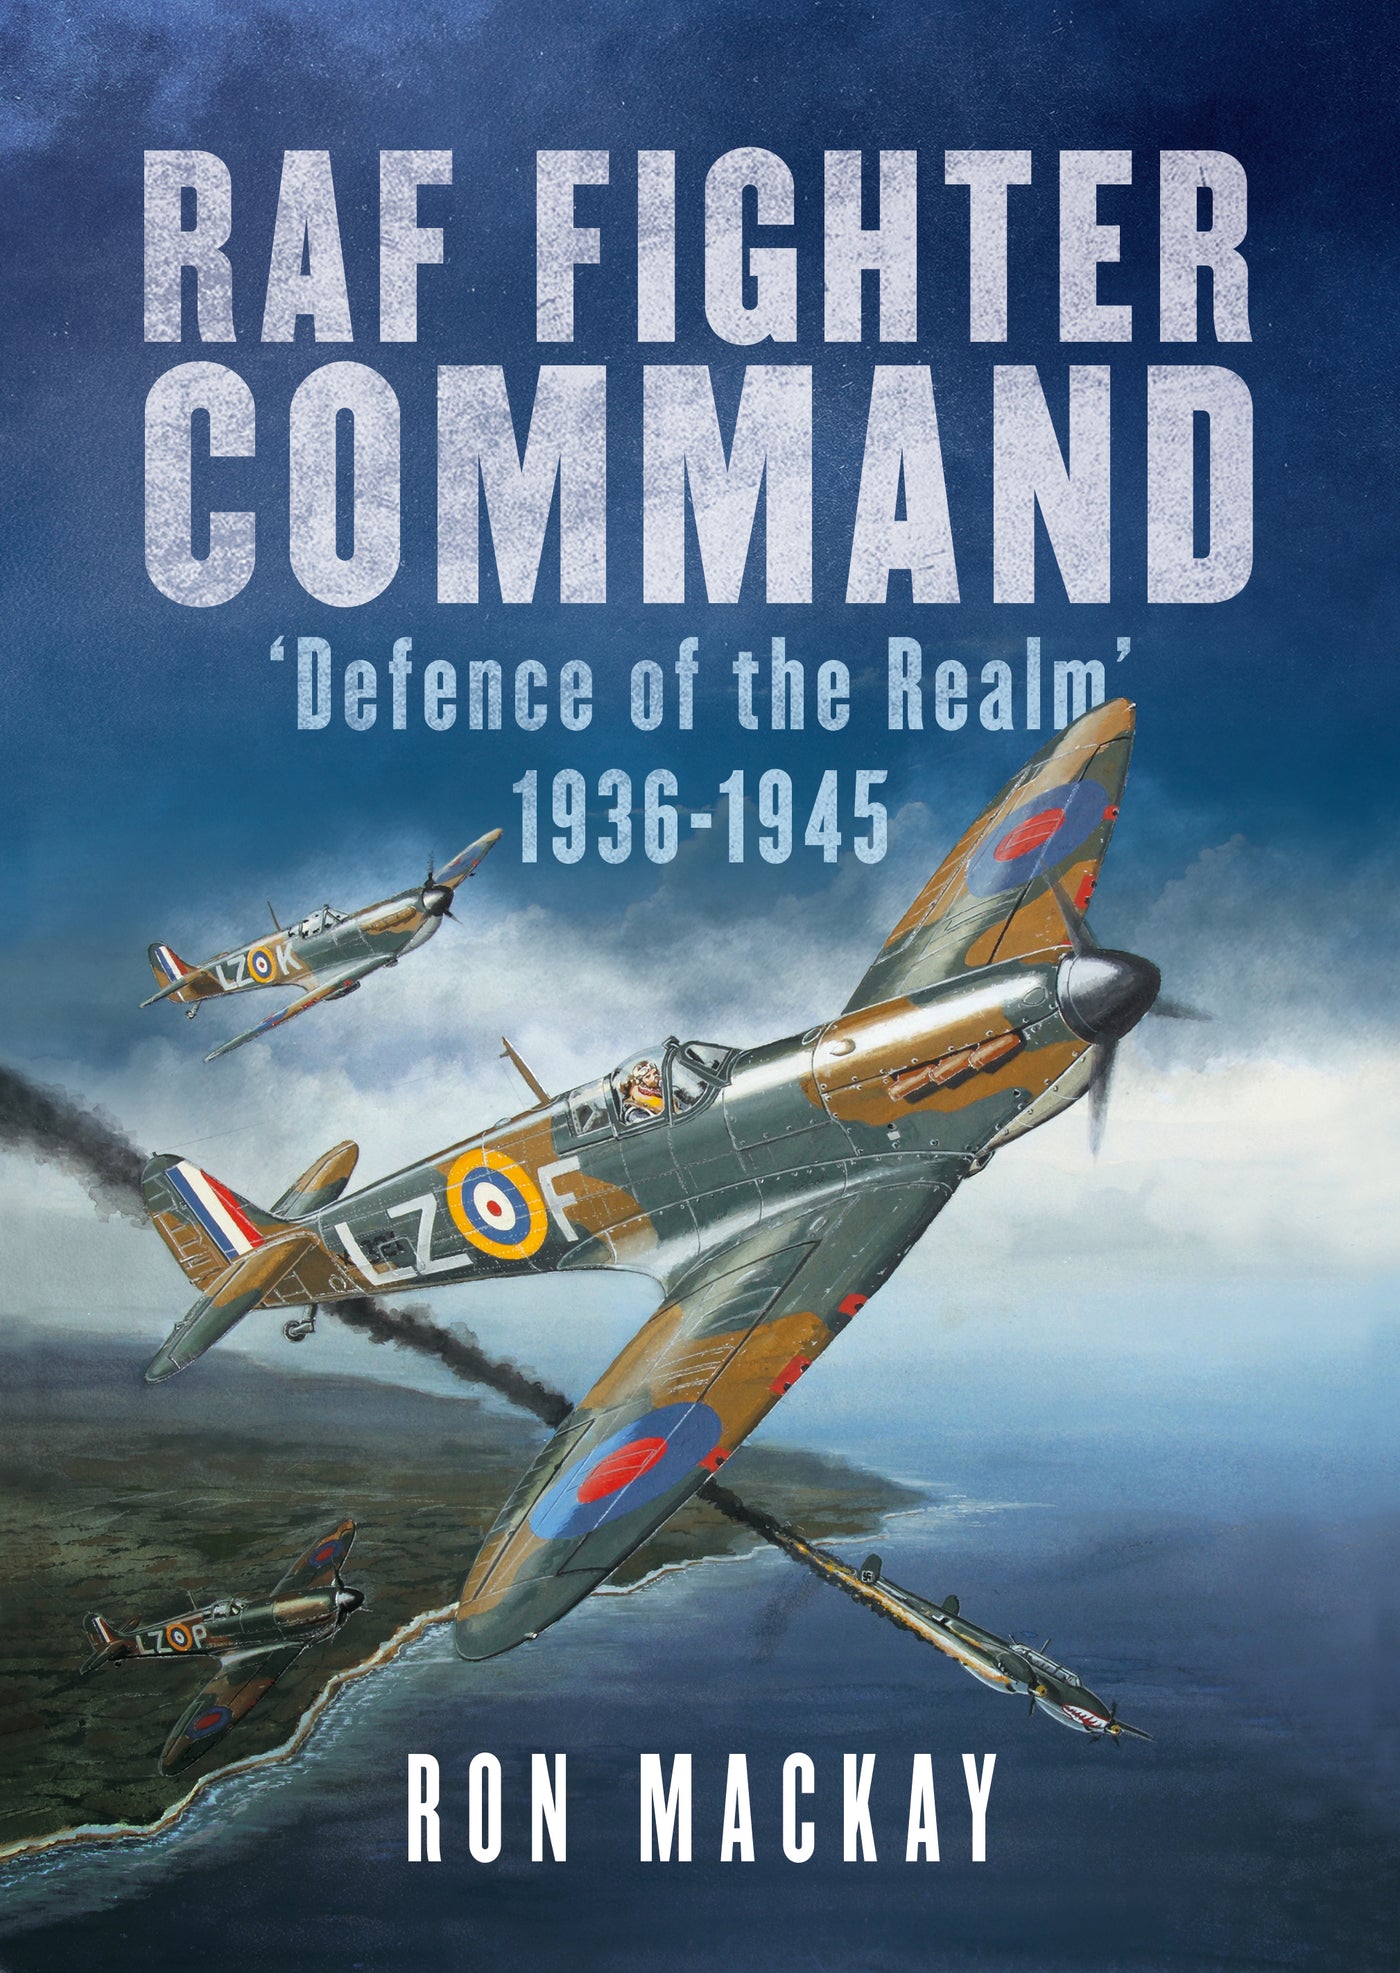 RAF Fighter Command